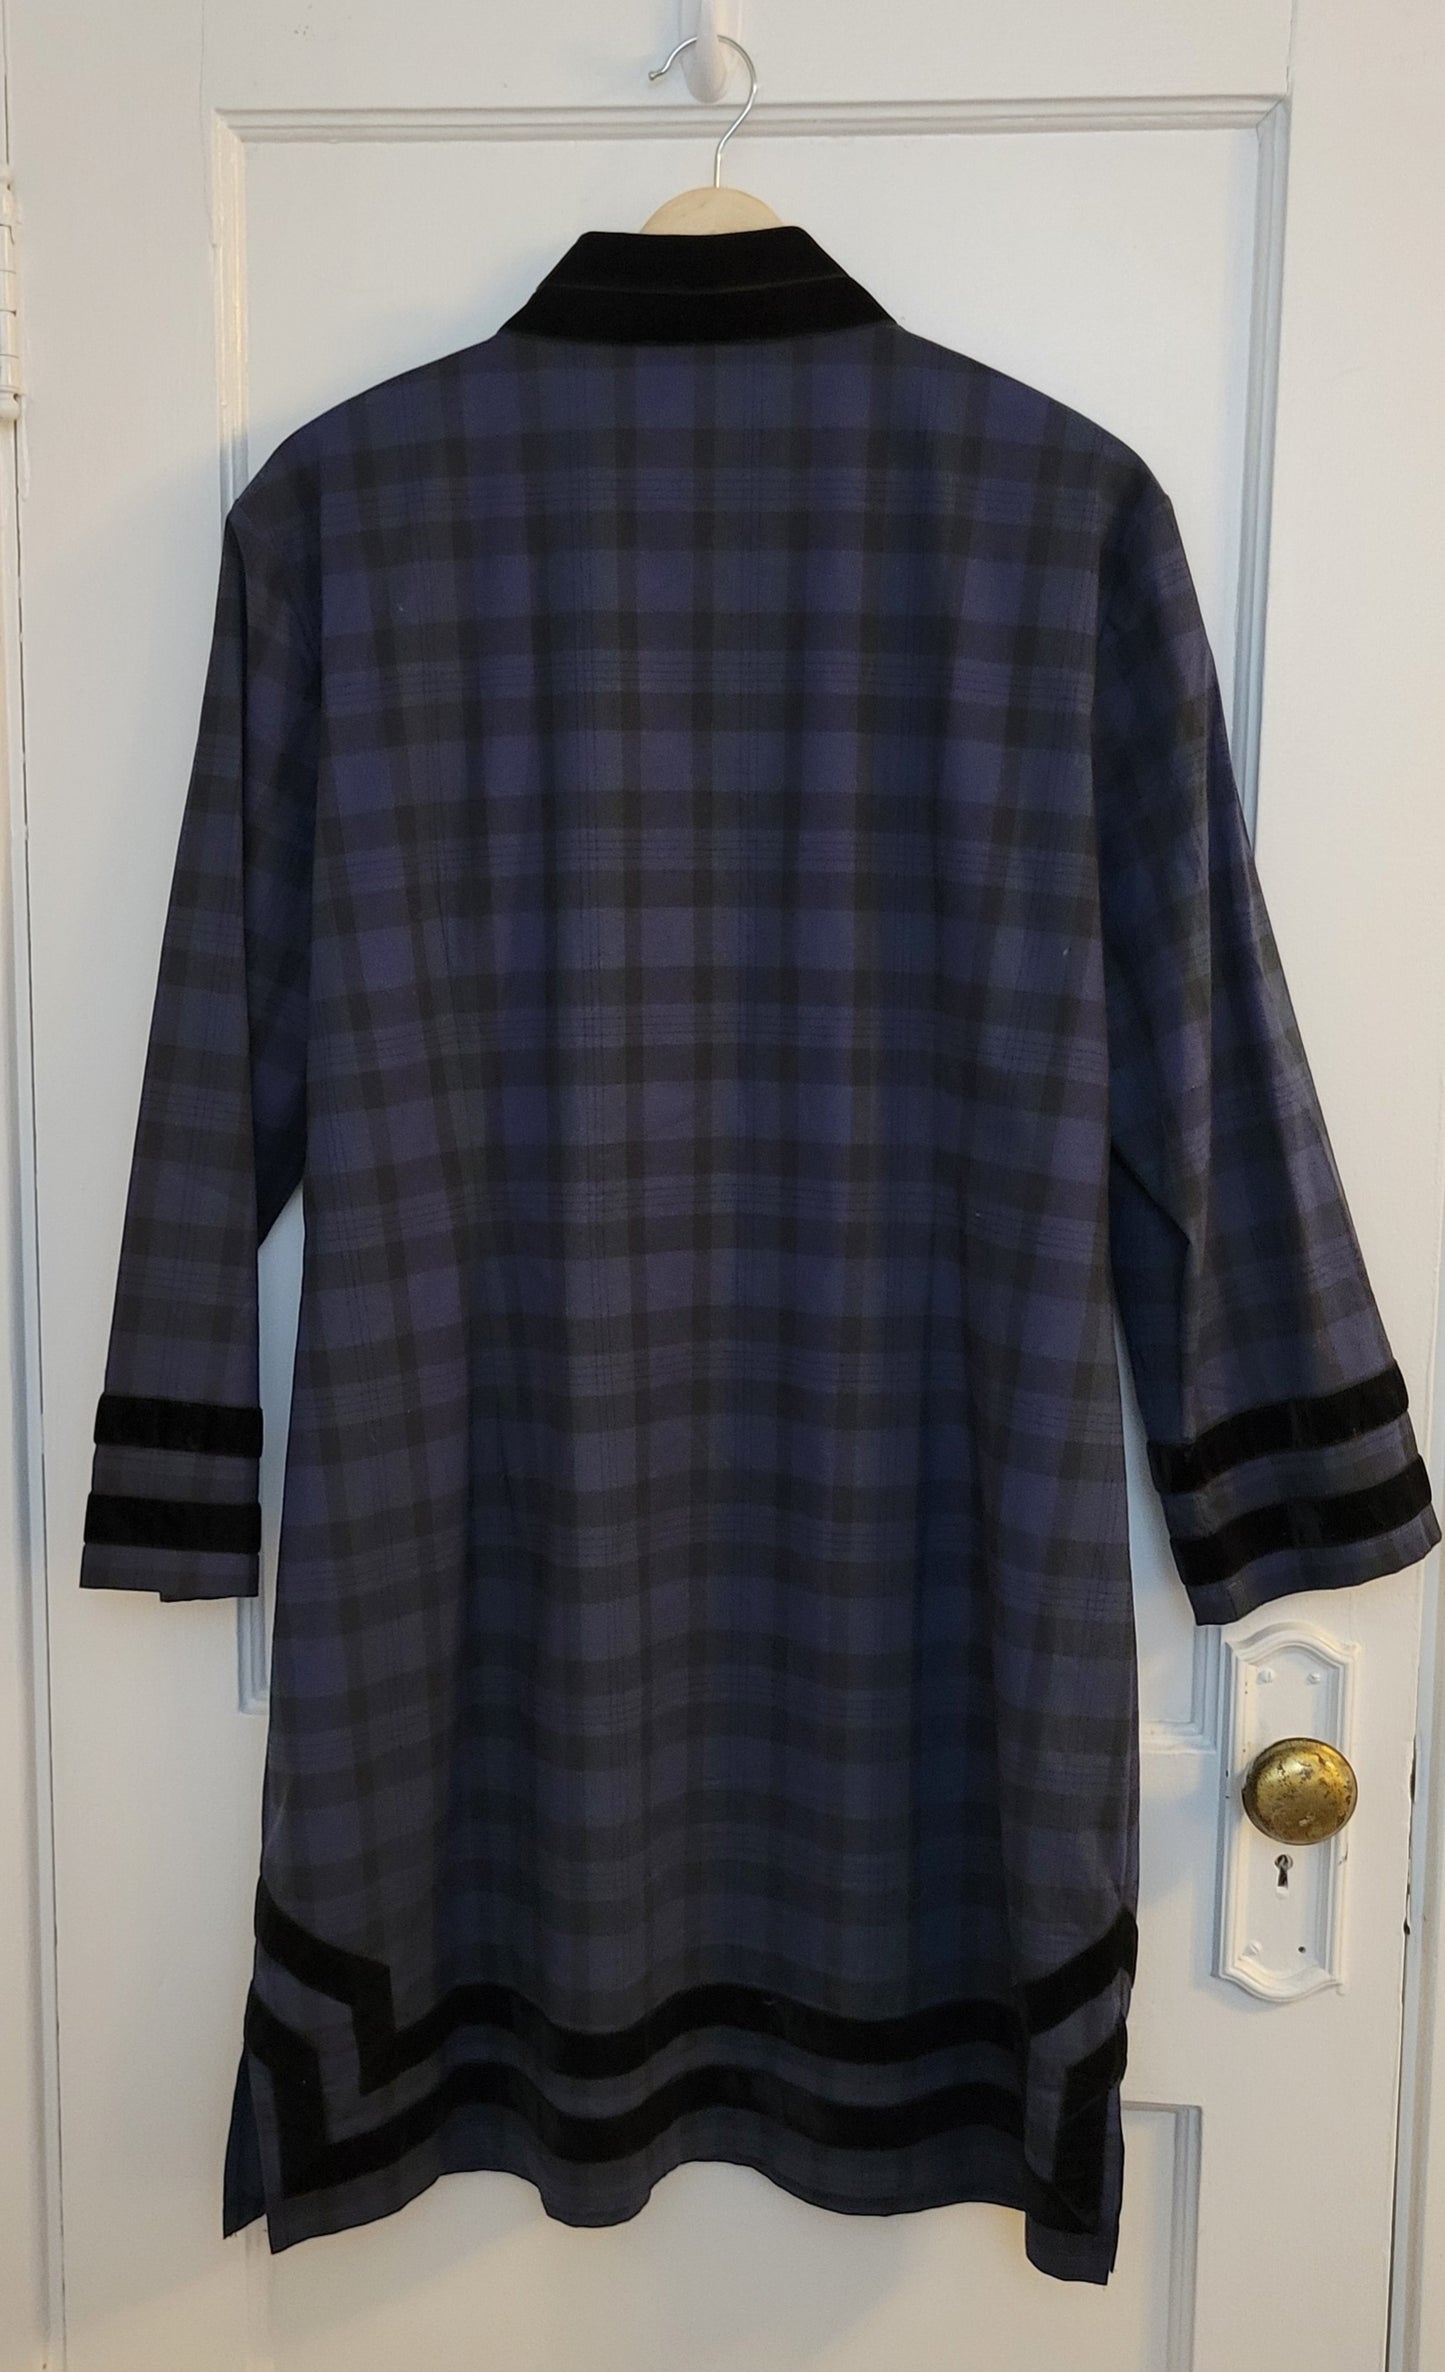 Sail to Sable Black Watch Plaid Long Sleeve Shift Dress, Women's Size XXL (Fits Smaller, Fits L to small XL)